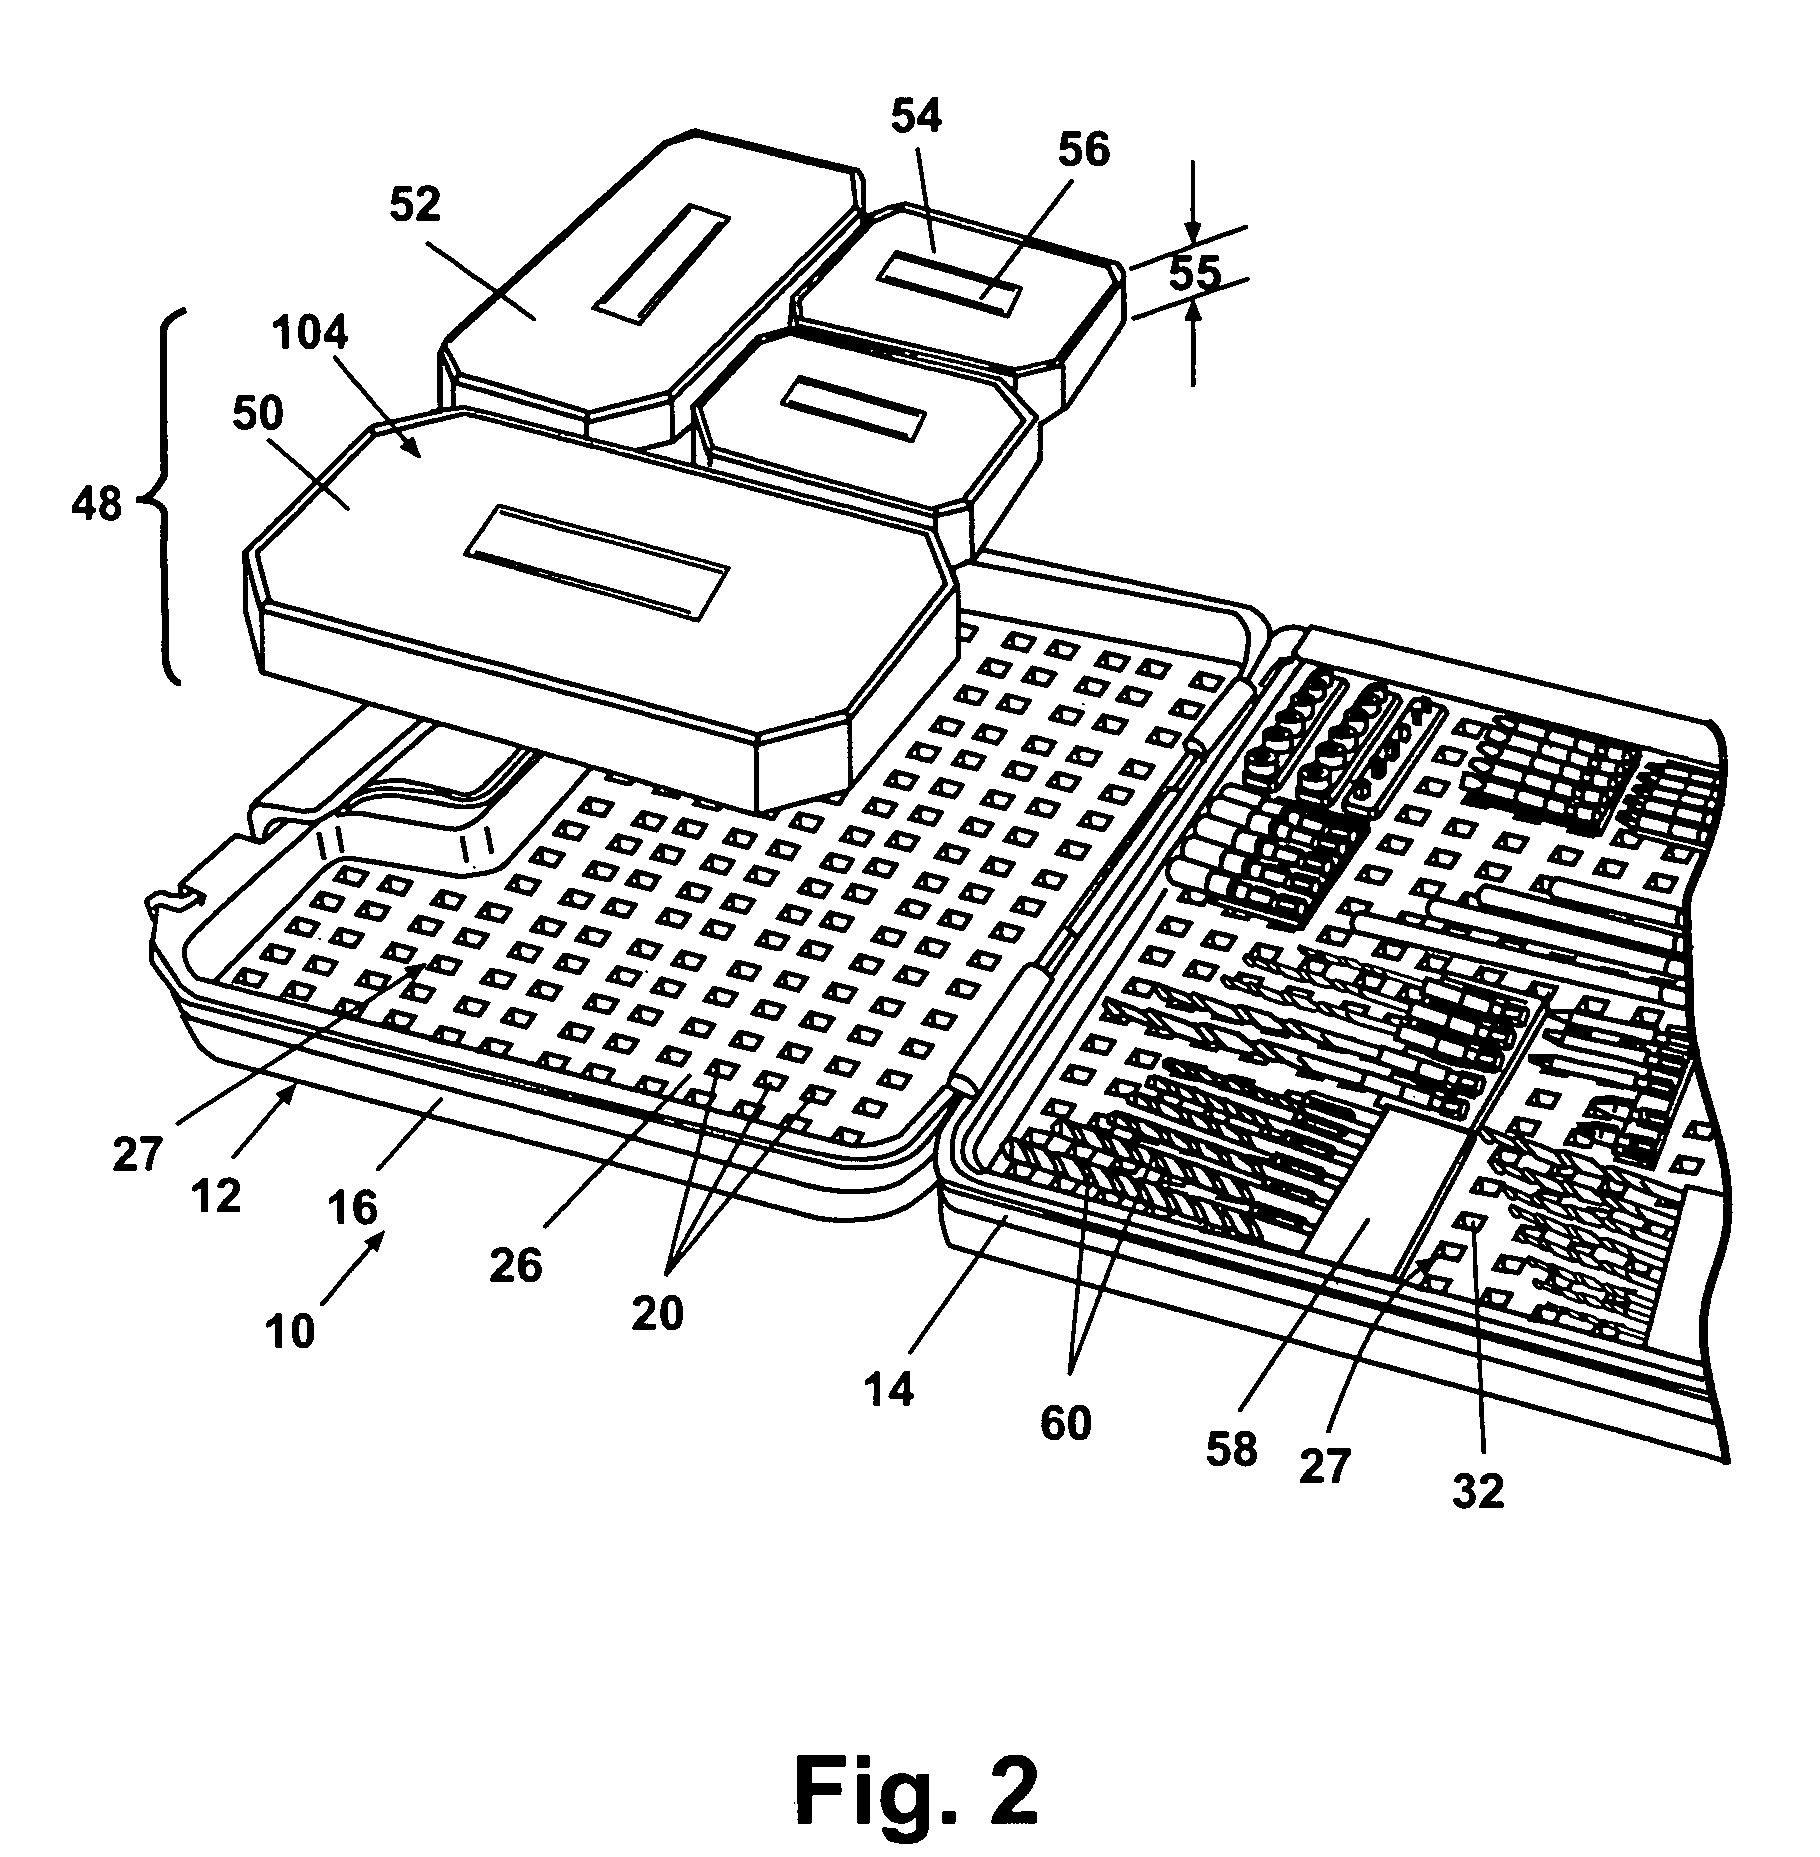 Tool and accessory container with inner grid system